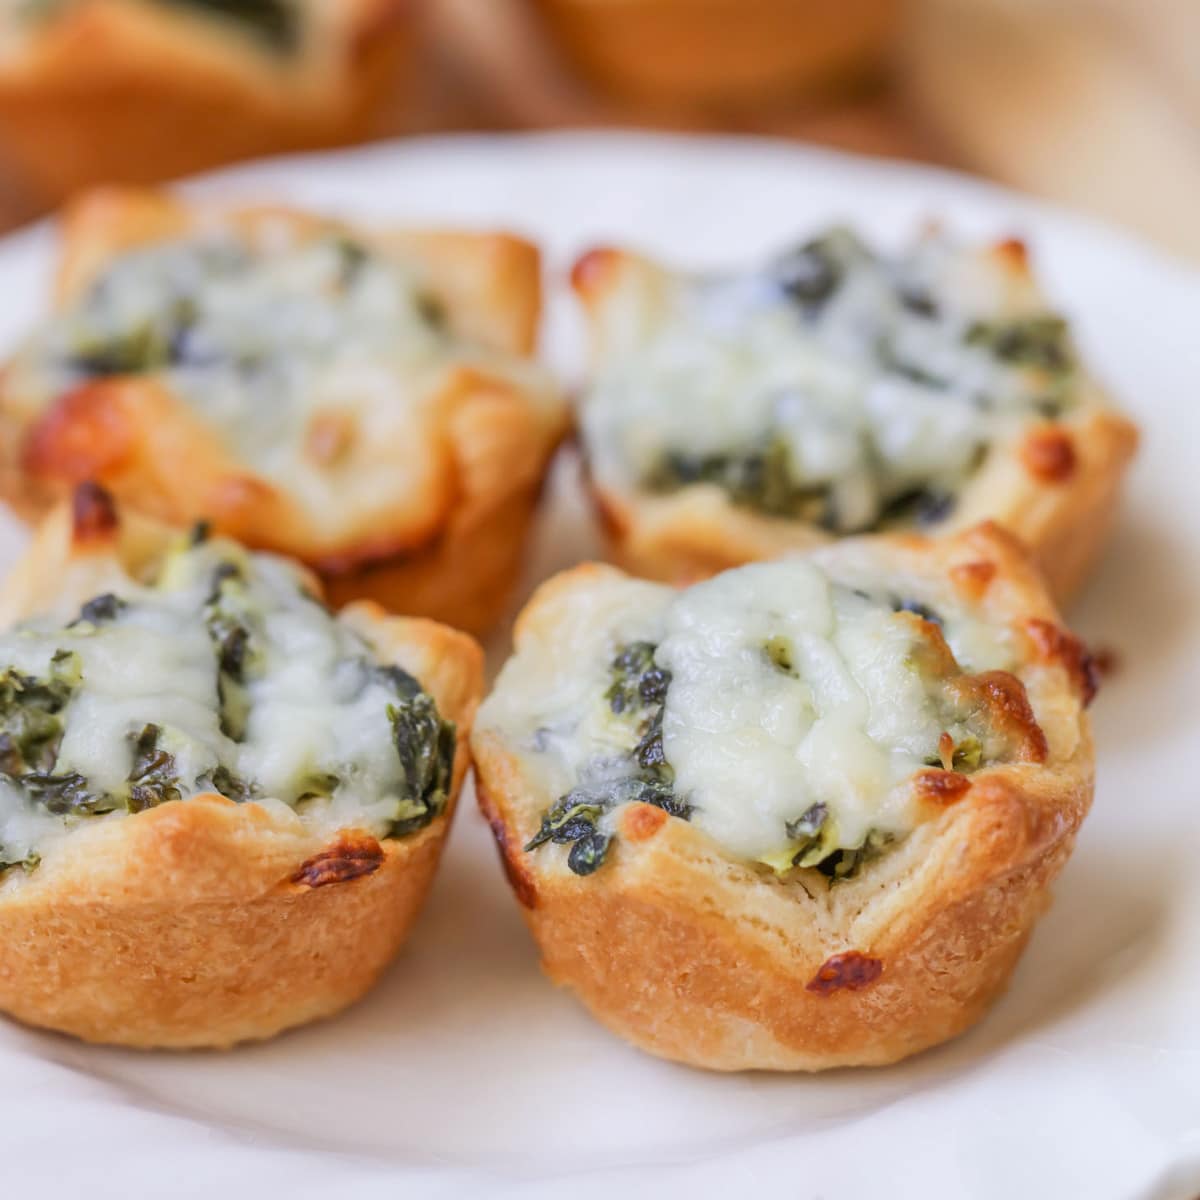 Thanksgiving appetizers - a plate filled with spinach dip bites.